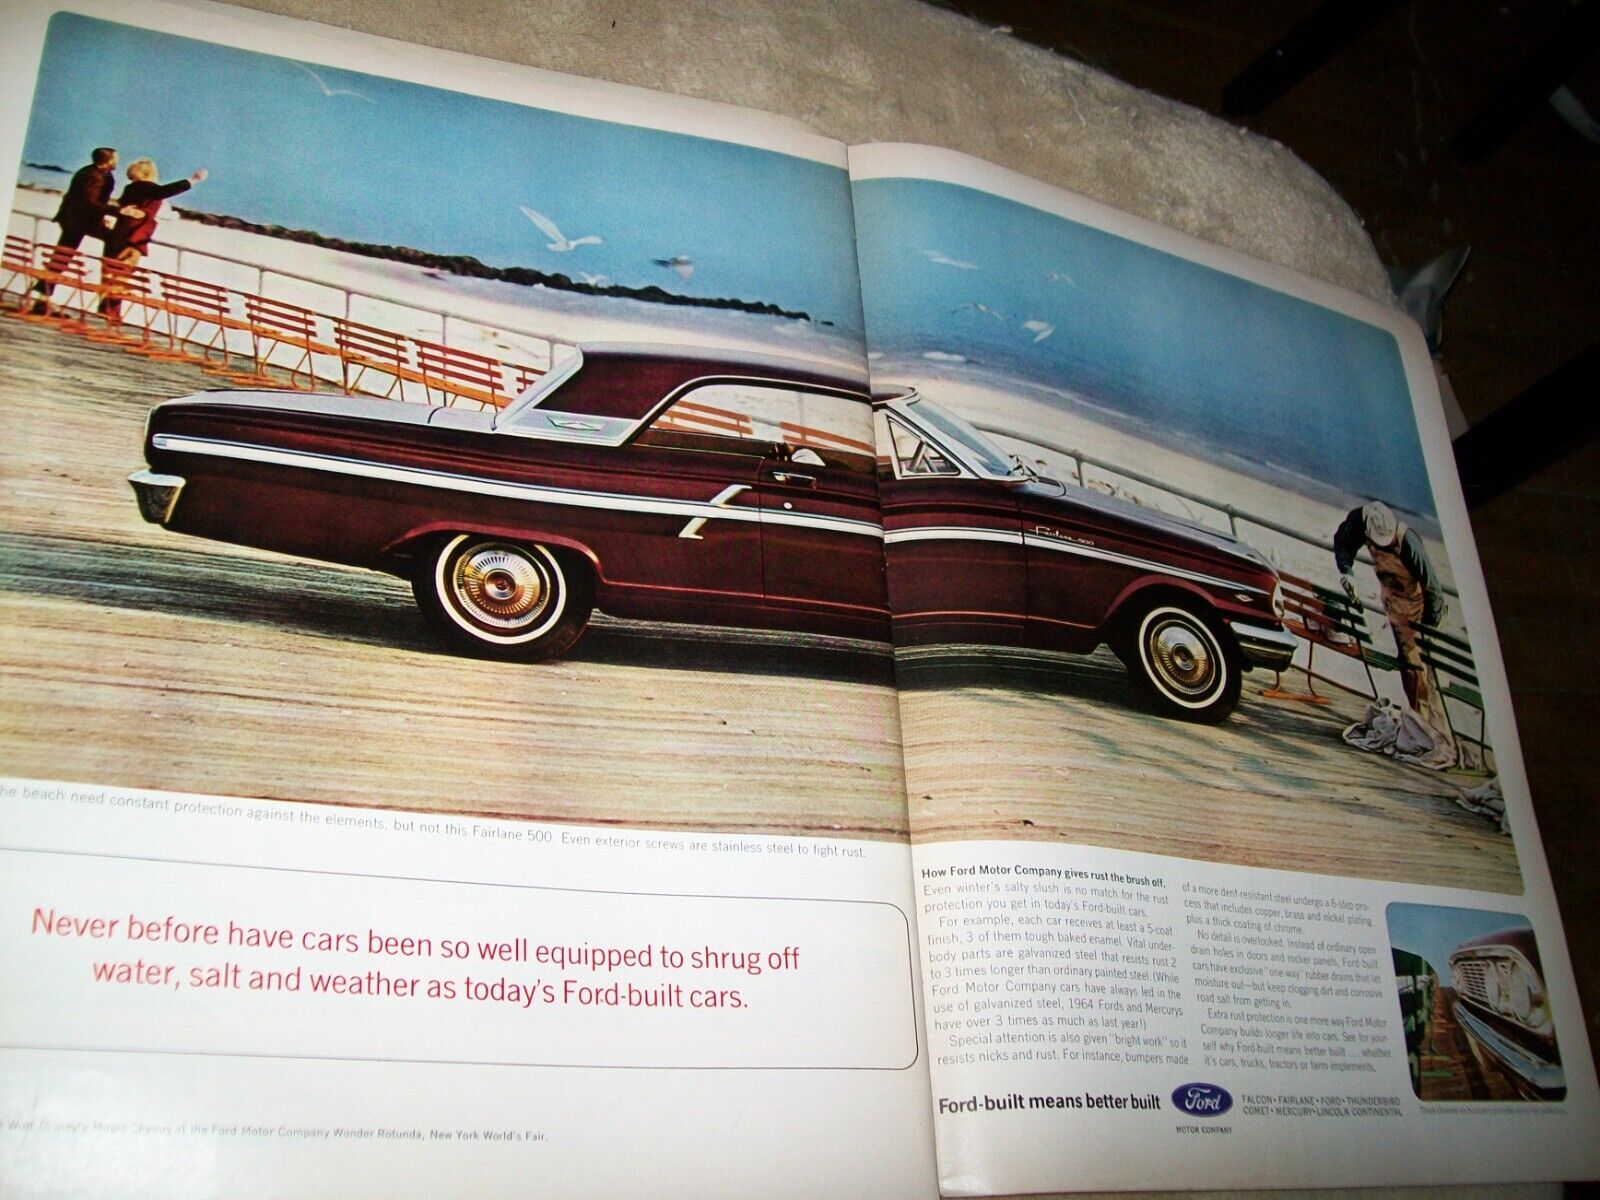 1964 Fairlane 500 Ford - benches at the beach need help   -  large mag car ad